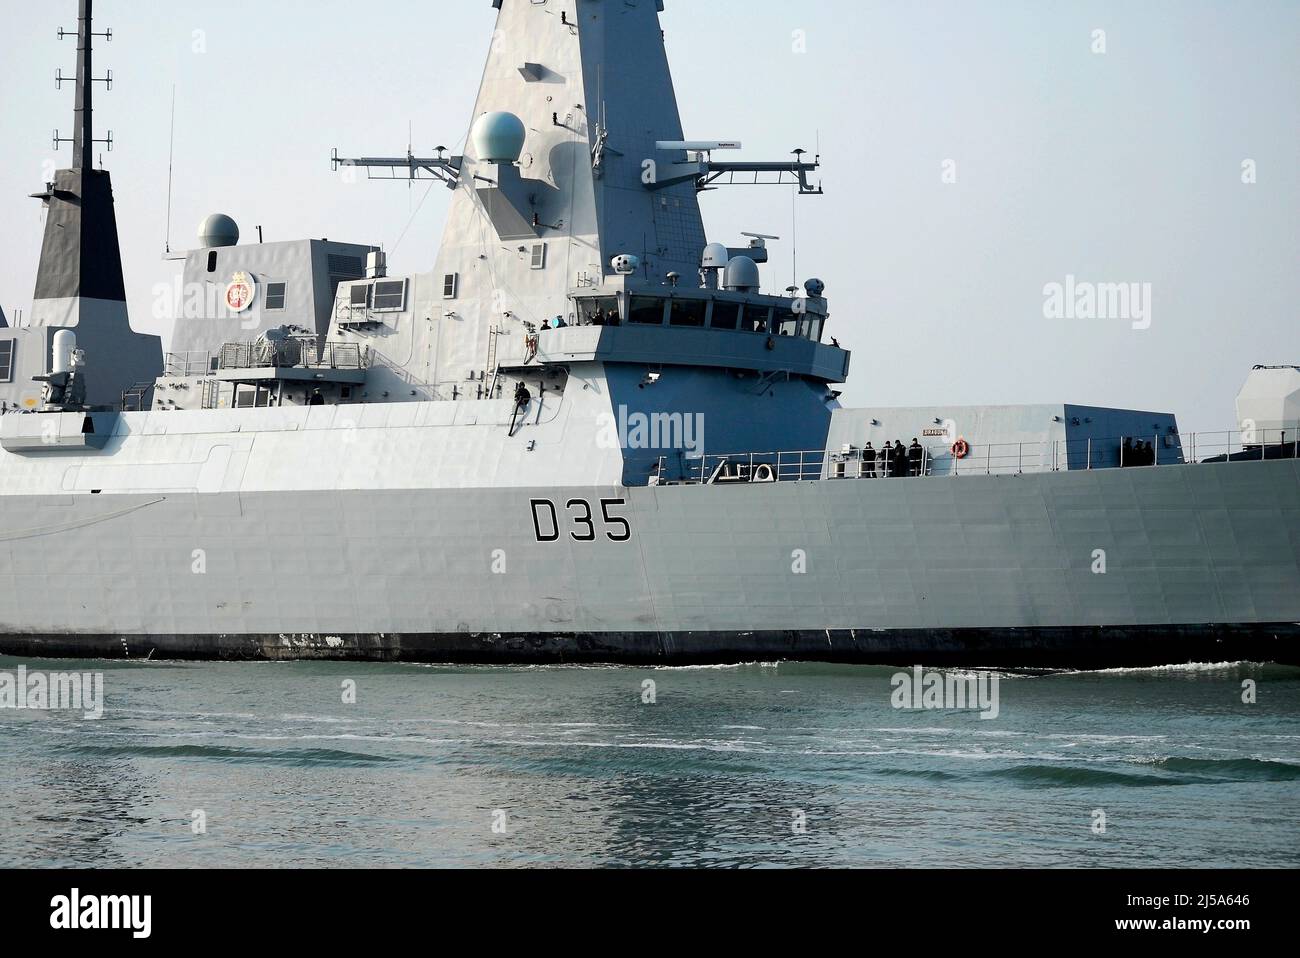 AJAXNETPHOTO. - 12TH MARCH, 2014. - PORTSMOUTH, ENGLAND. -  TYPE 45 DESTROYER HMS DRAGON ARRIVING IN HARBOUR. PHOTO:JONATHAN EASTLAND/AJAX REF:DTH141203 7440 Stock Photo